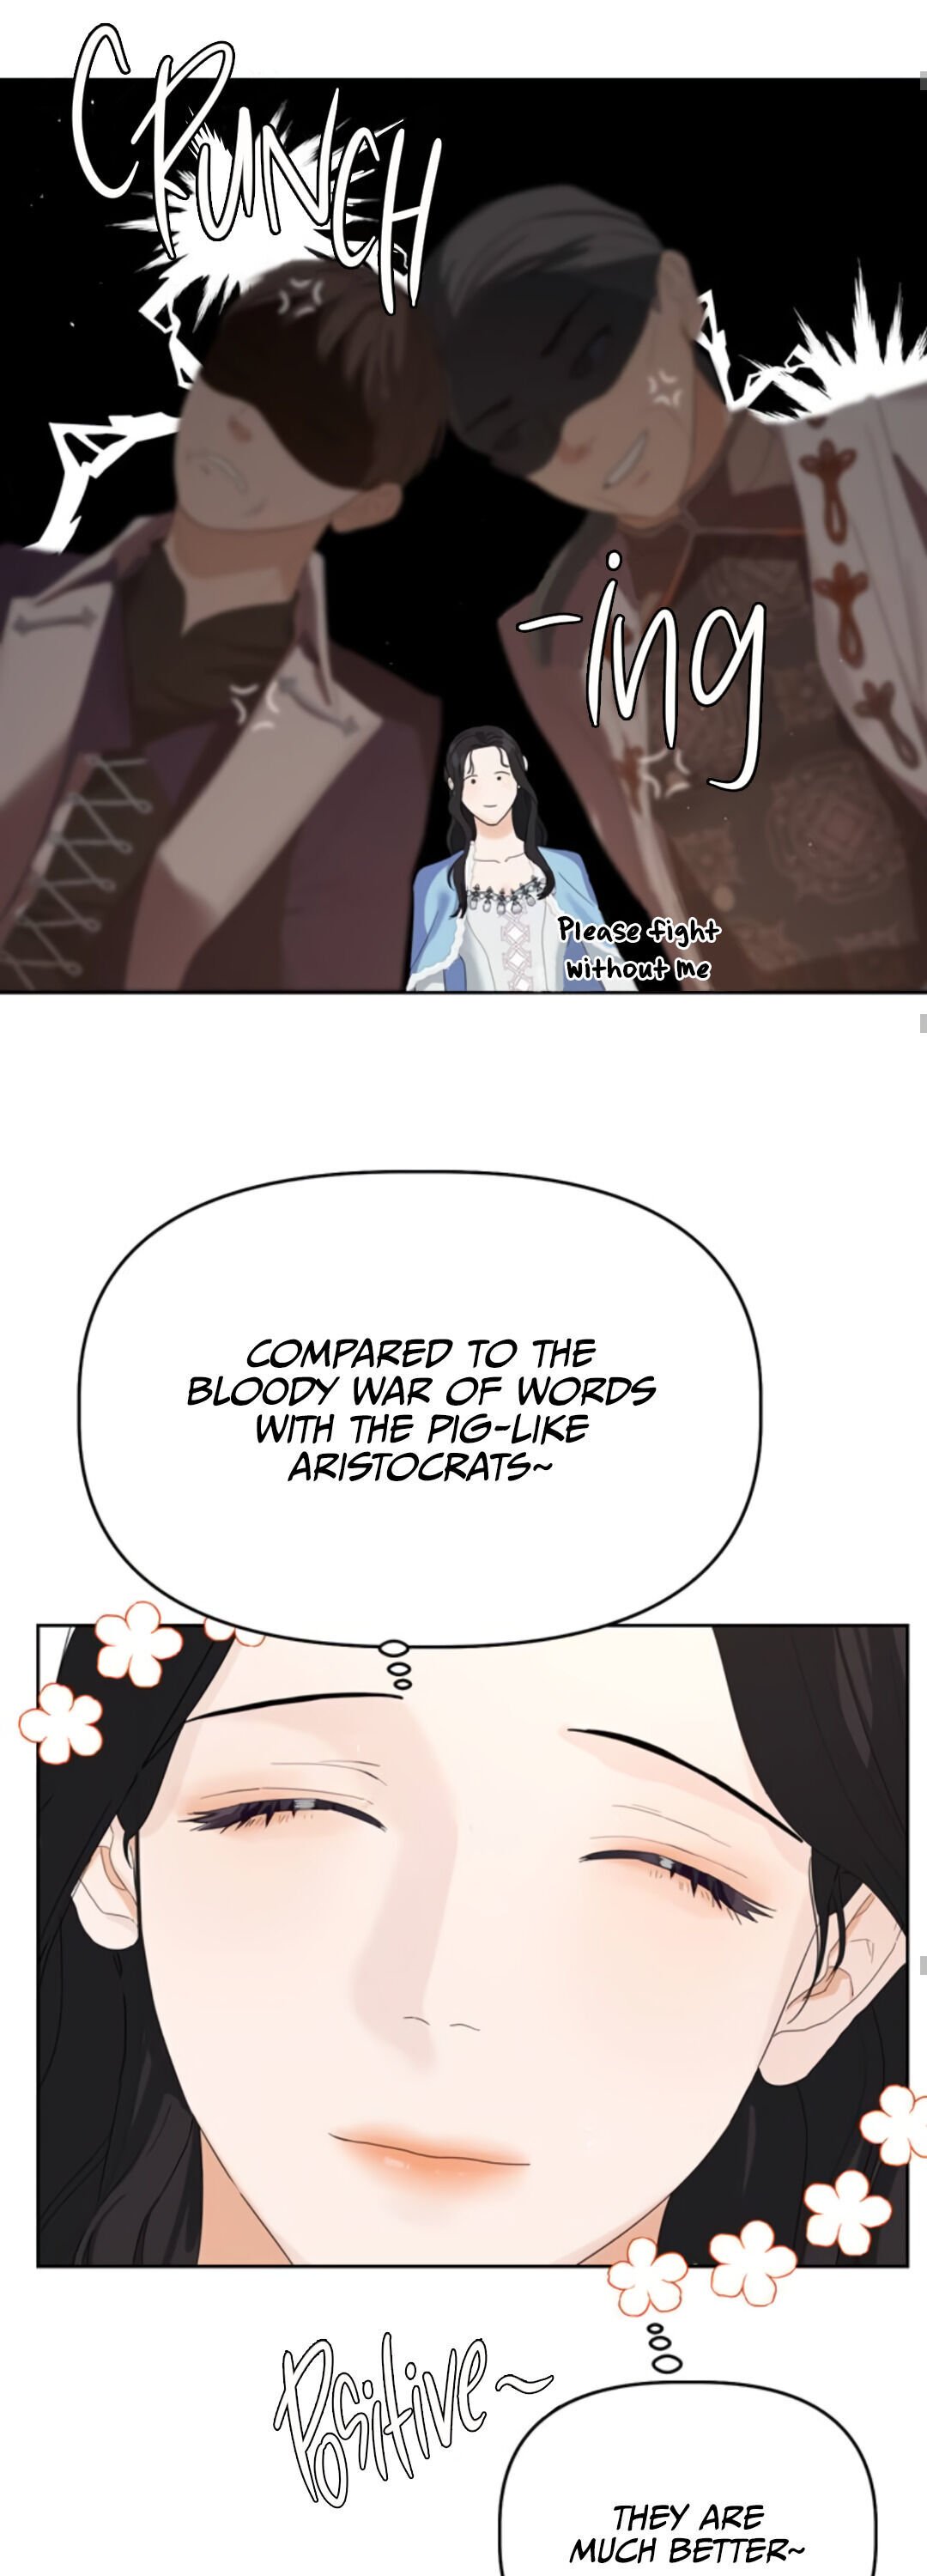 The Princess After The Revolution chapter 1